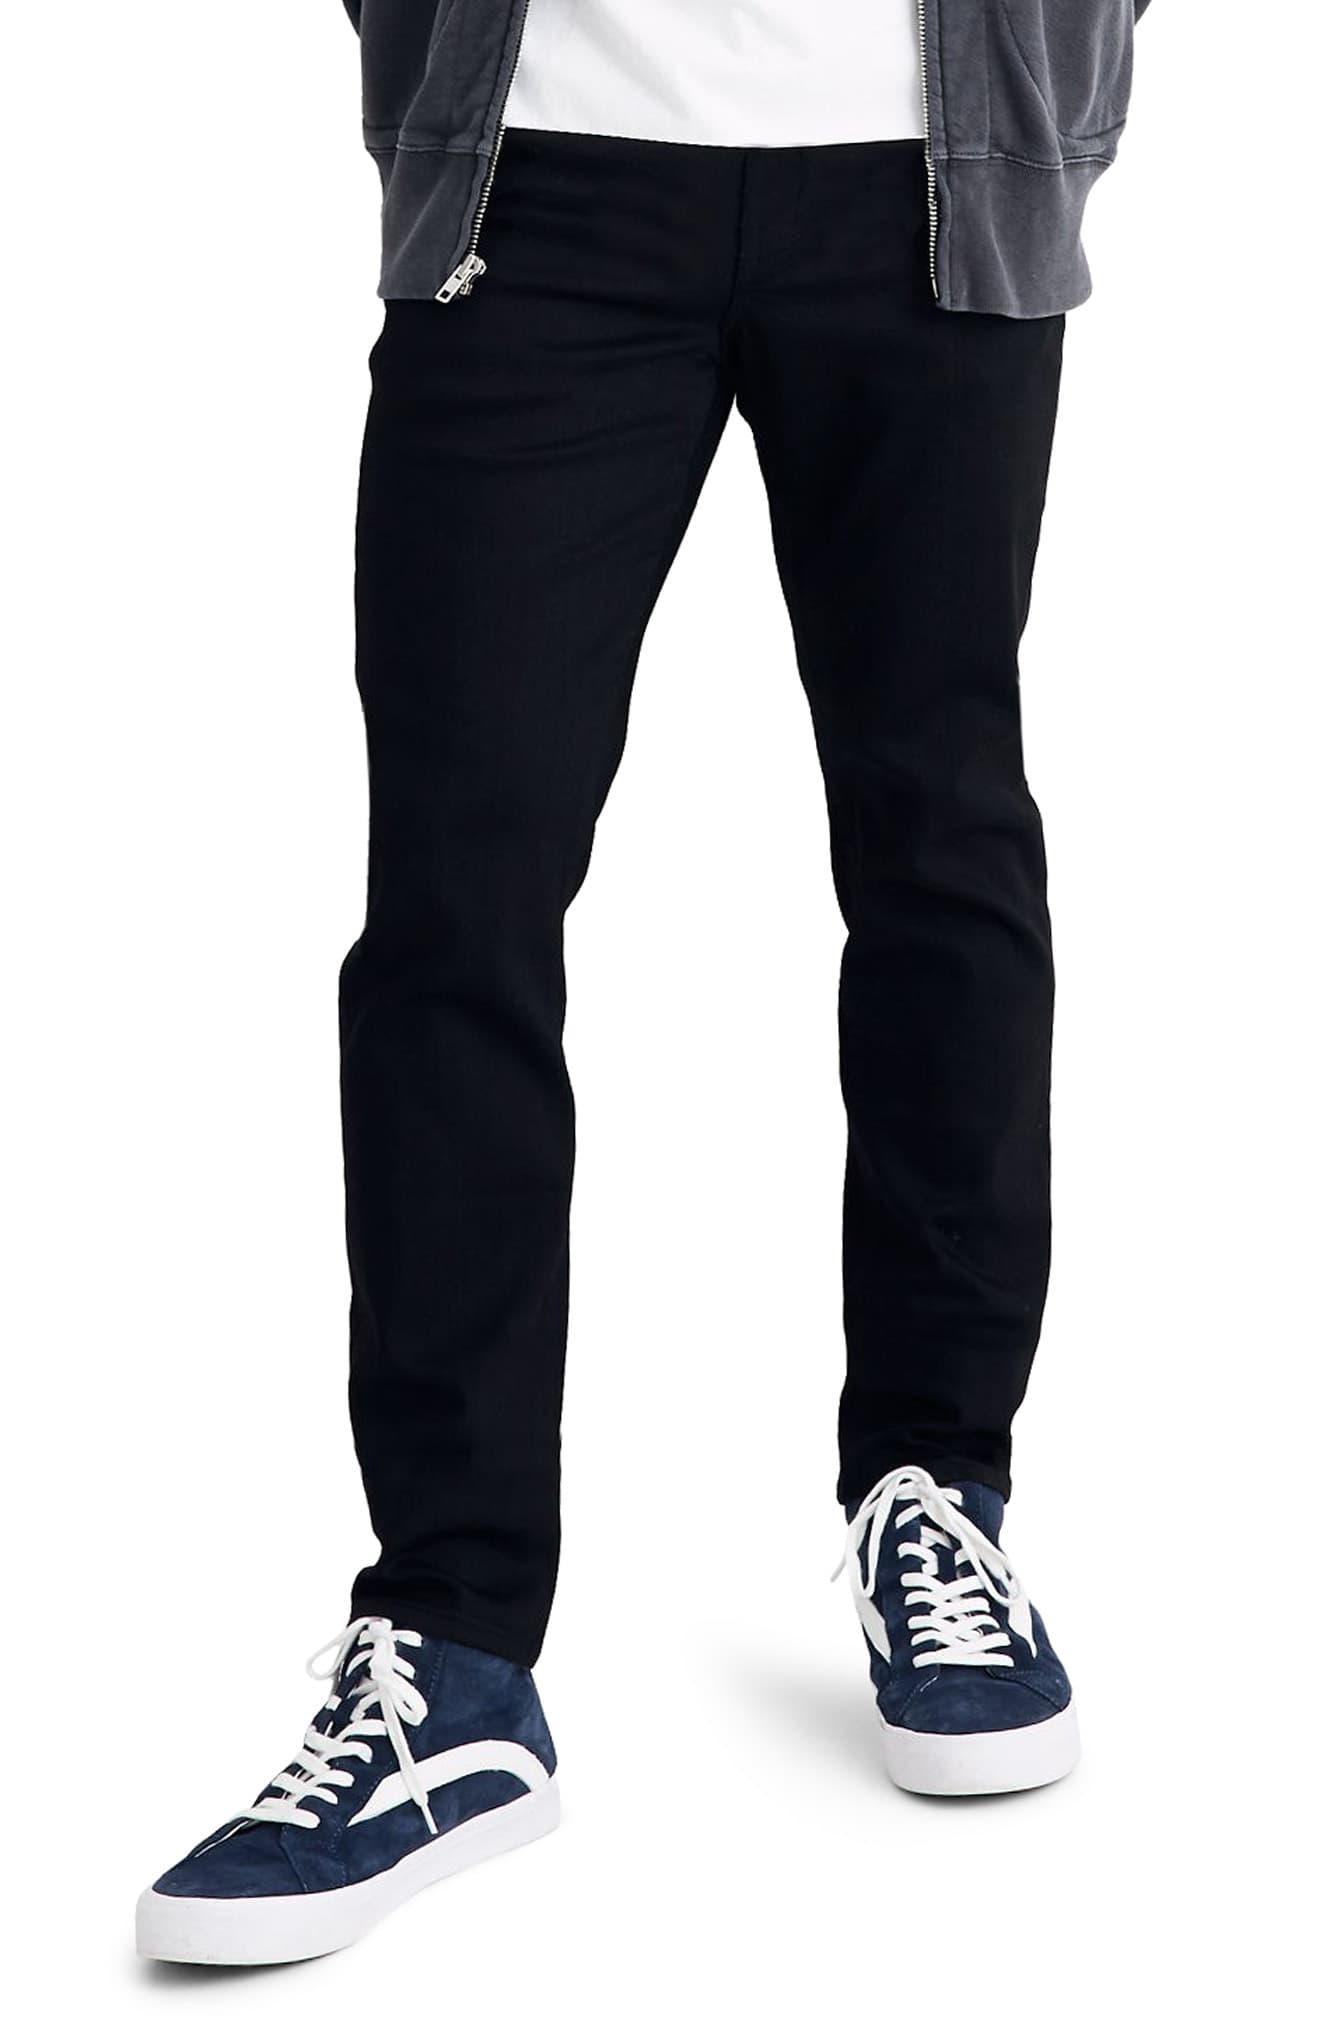 fitted black jeans mens